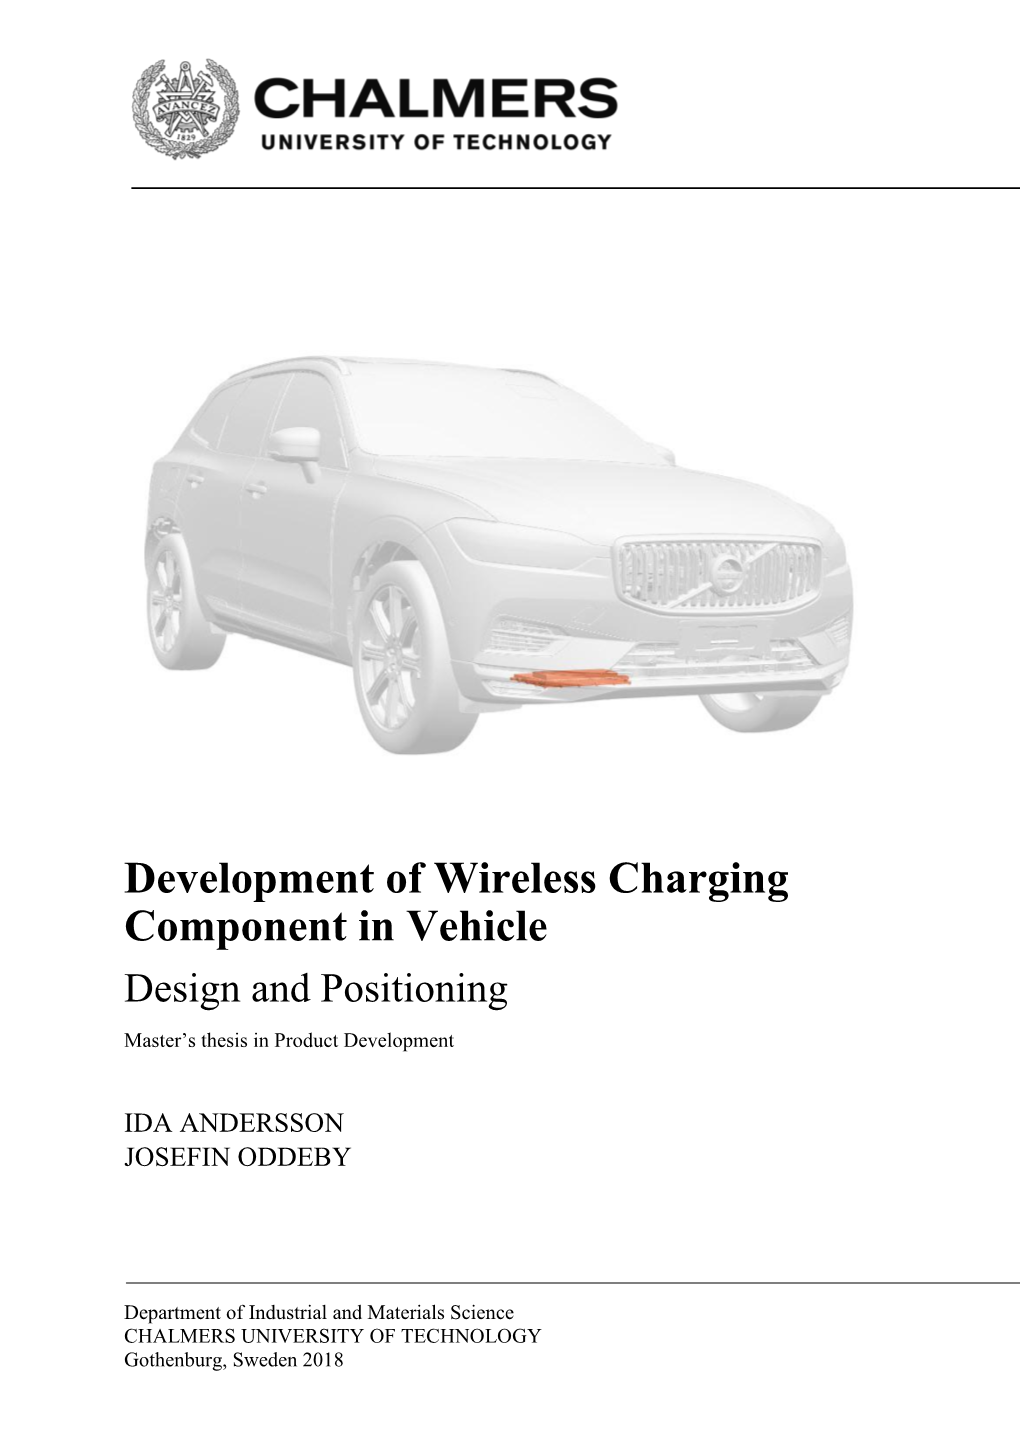 Development of Wireless Charging Component in Vehicle Design and Positioning Master’S Thesis in Product Development